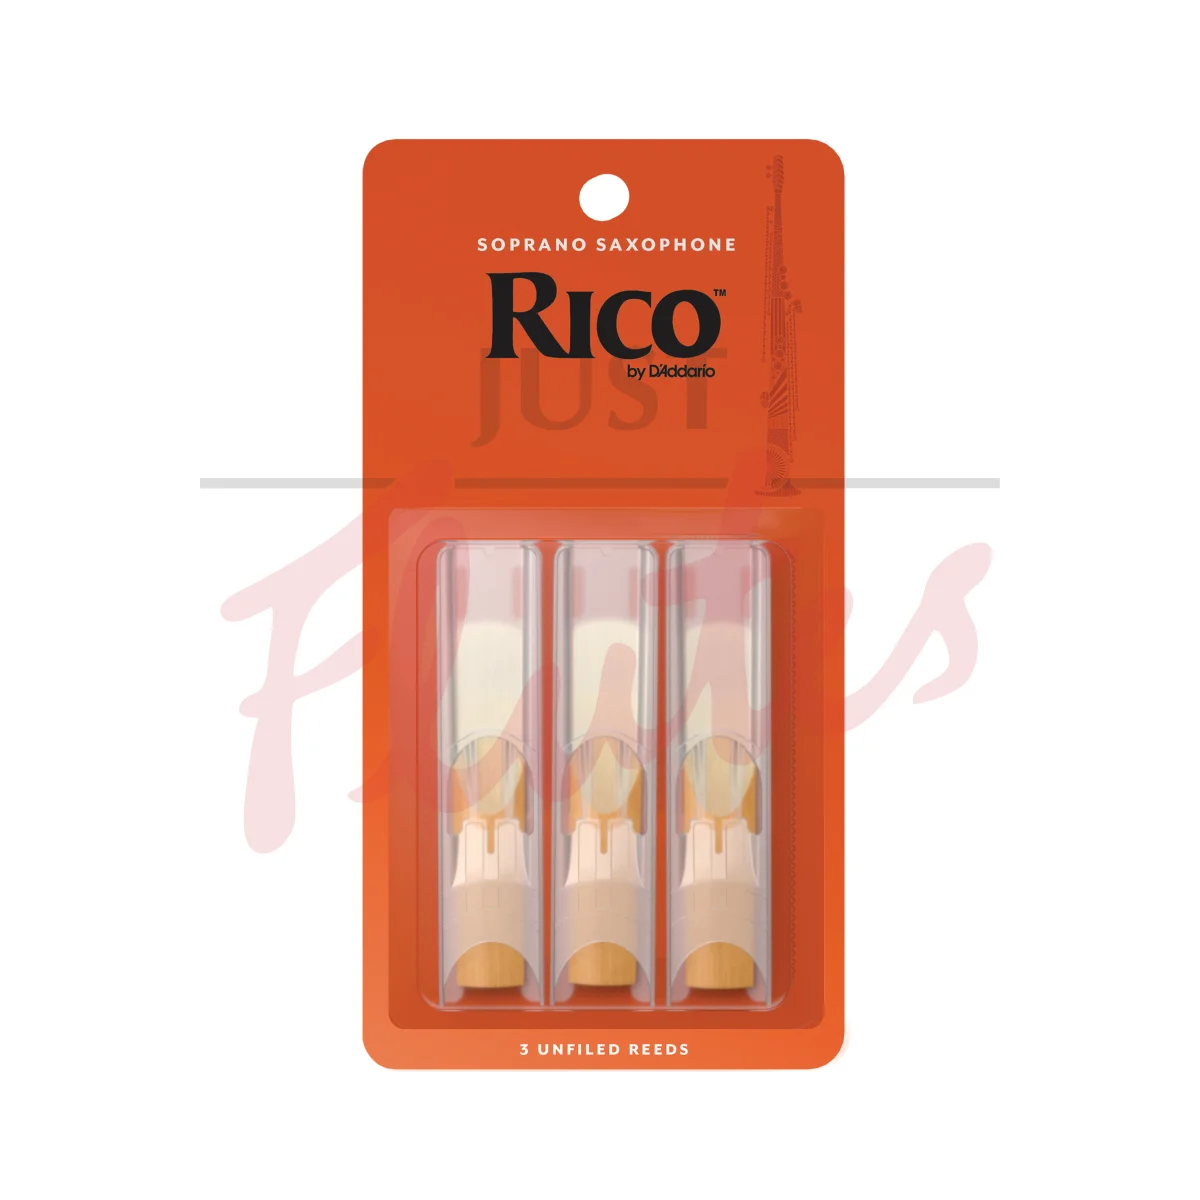 Rico by D'Addario RIA0325 Soprano Saxophone Reeds, Strength 2.5, Pack of 3